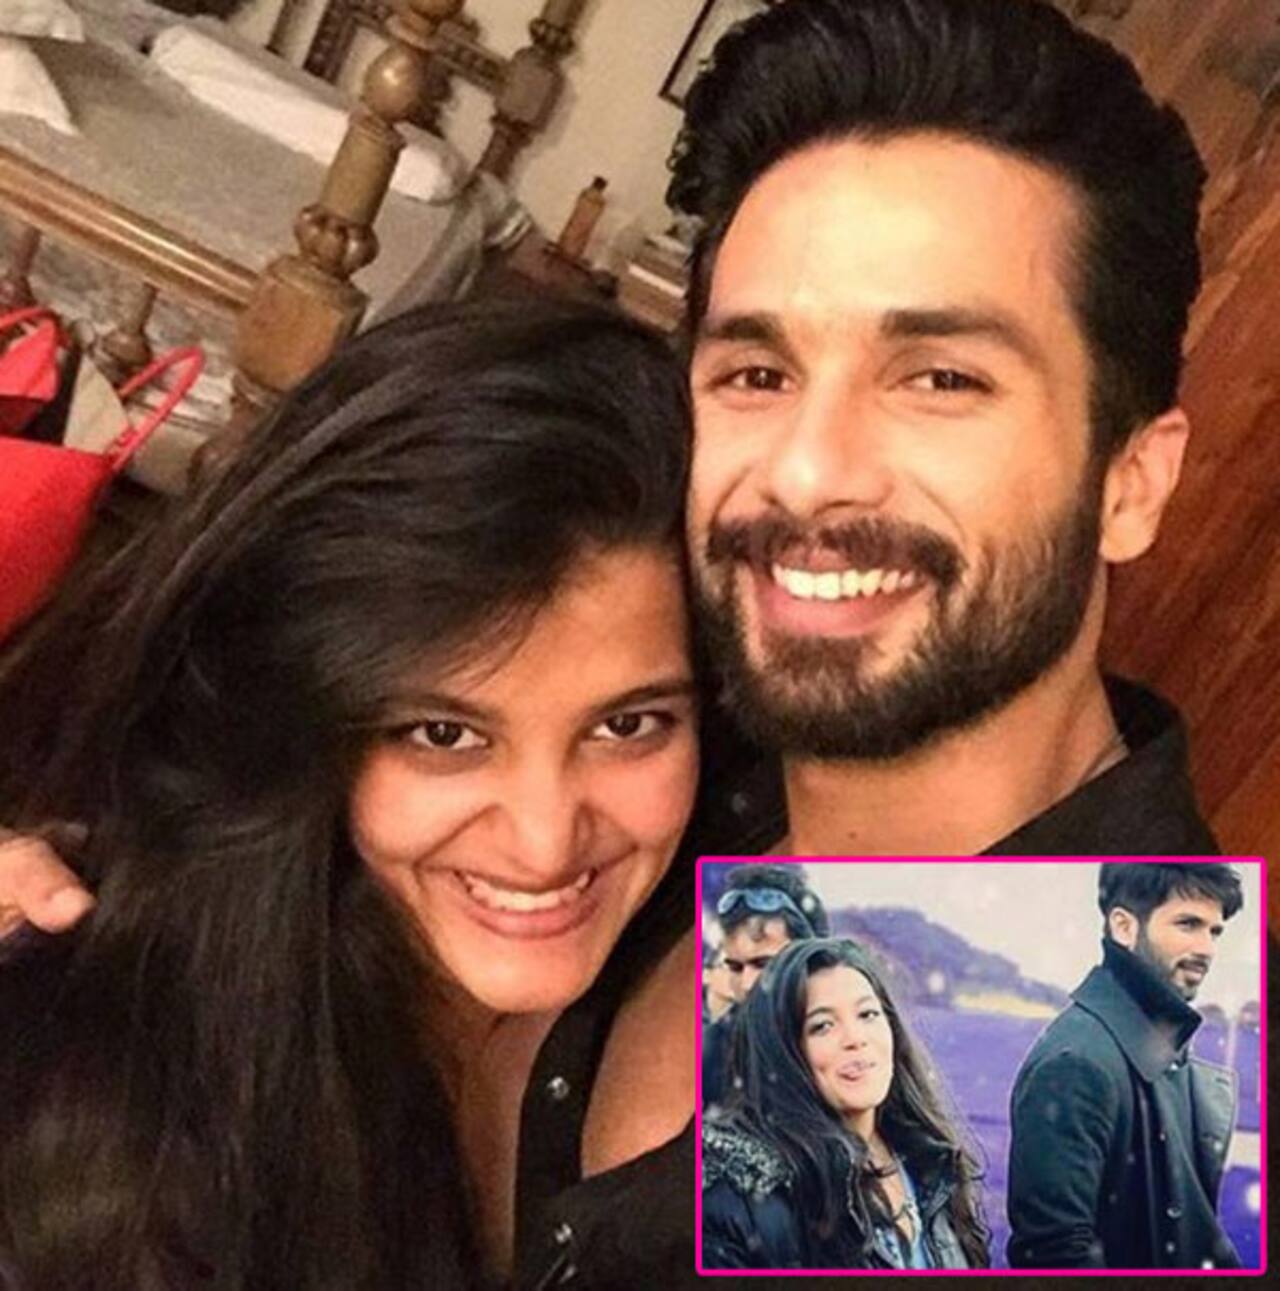 Shahid Kapoor shares an adorable picture with sister Sanah Kapoor - view pic